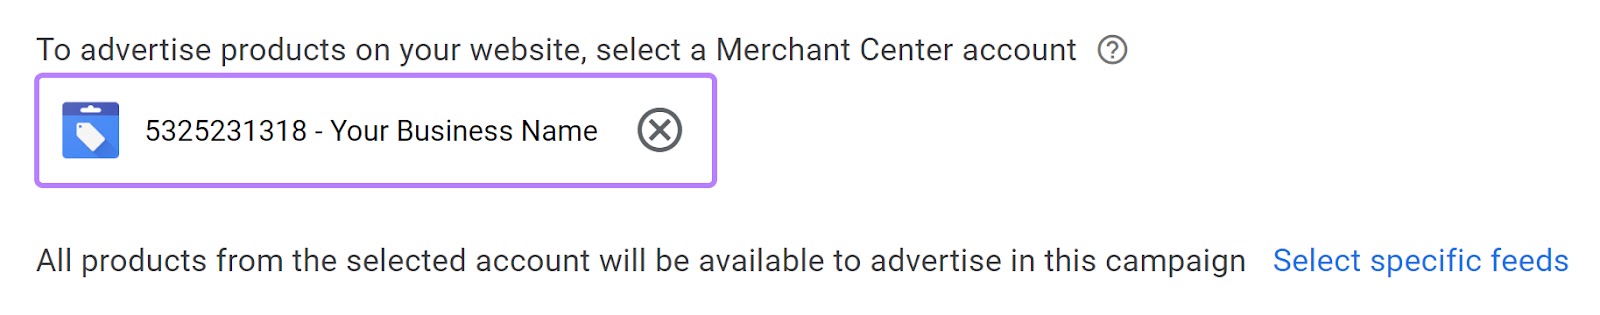 To advertise product on your website, select a Merchant Center account